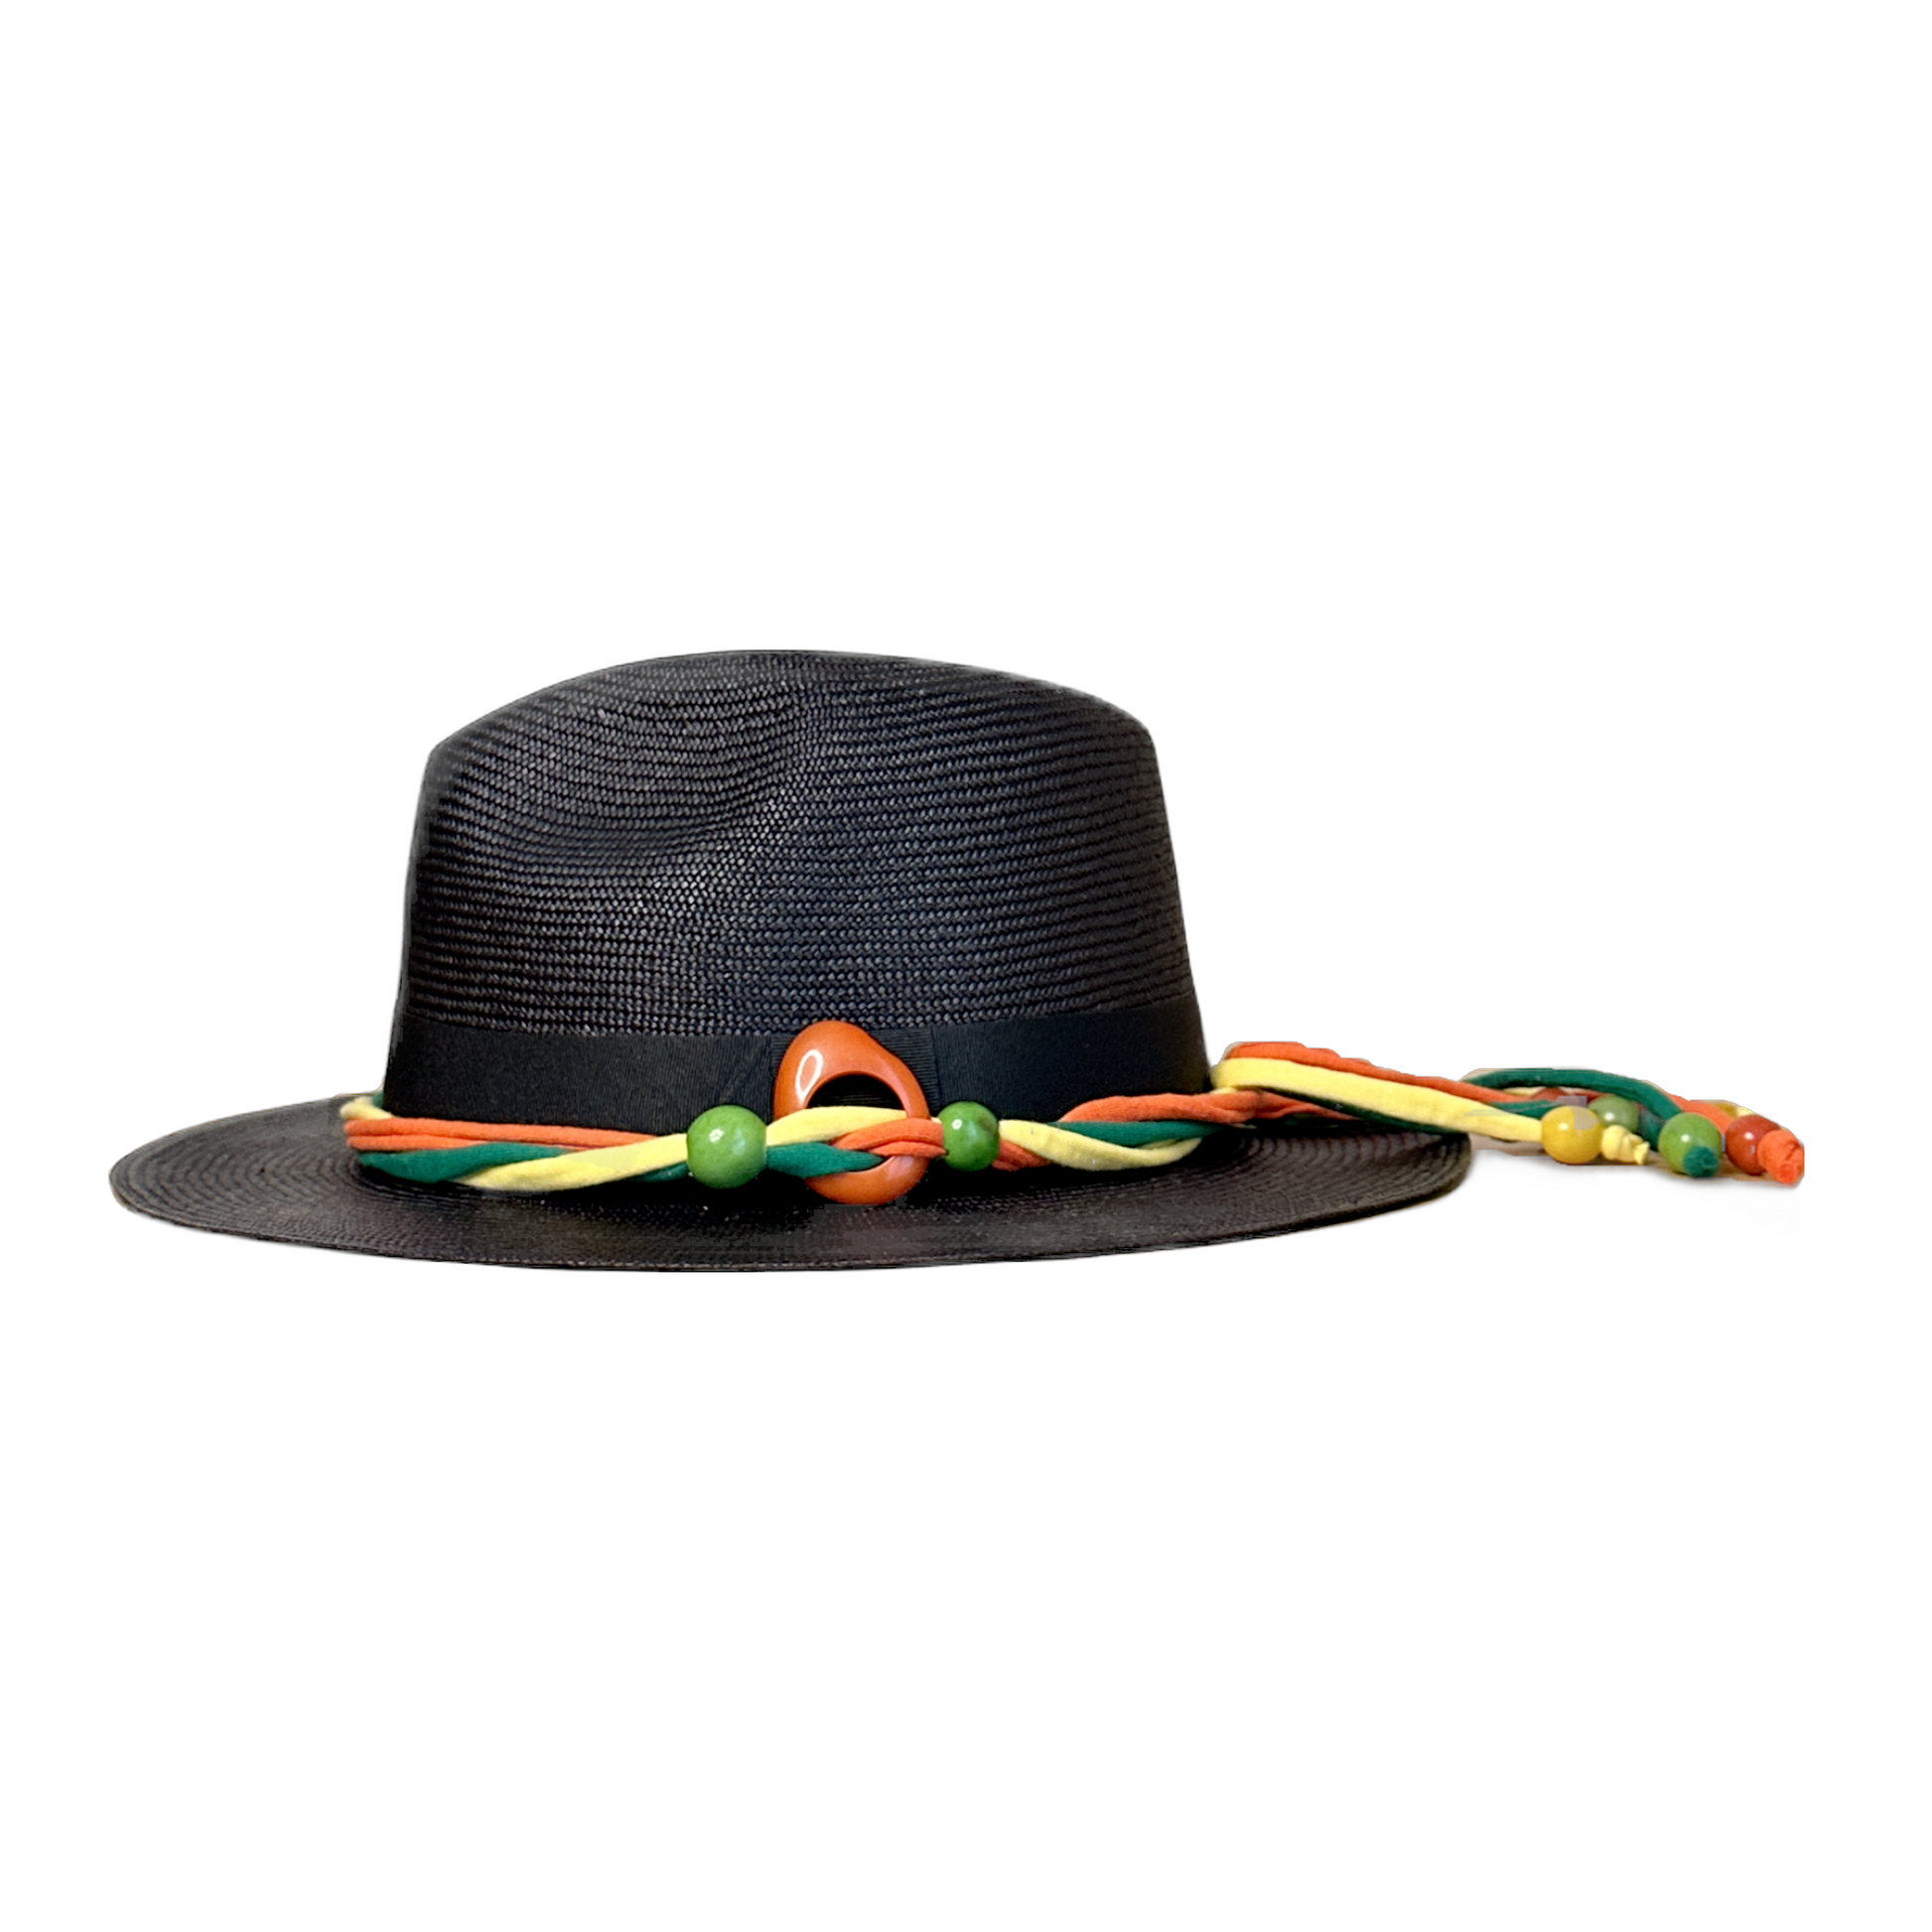 Cotton and Tagua Nut Hat Band - The Hip Hat 